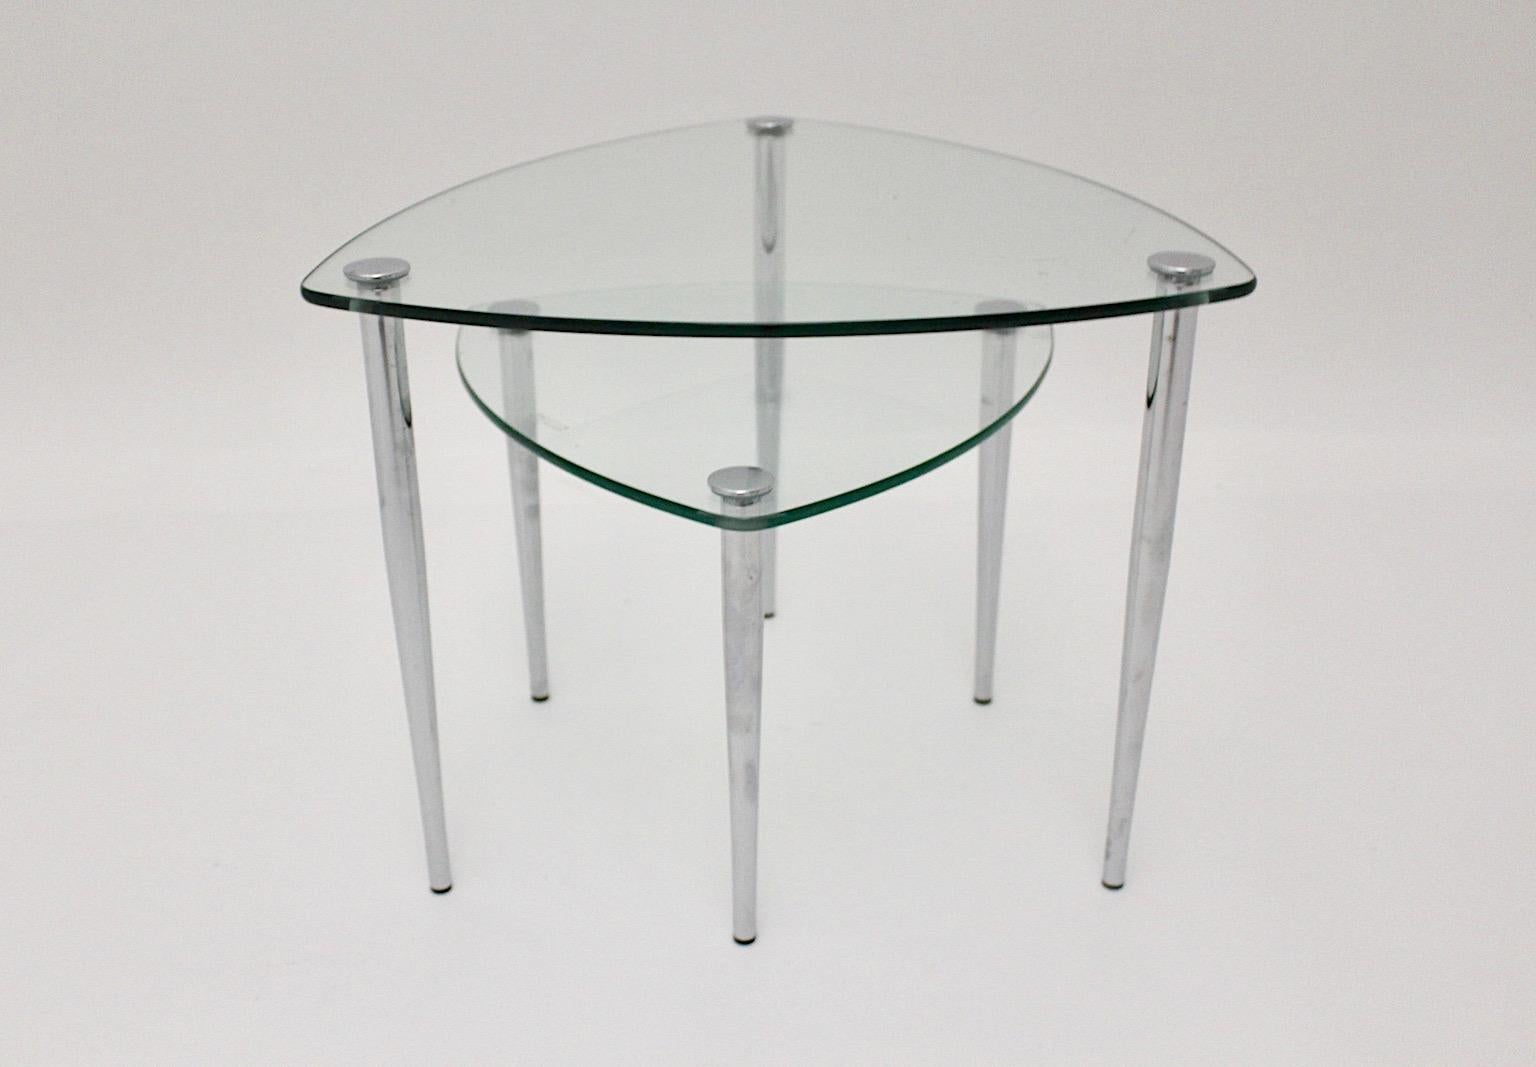 Mid-Century Modern set of 2 vintage side tables or sofa tables or stacking tables  triangle-like from clear glass and chromed screwable feet.
An amazing set of side tables or stacking tables  designed and manufactured 1960s Italy.
The stacking